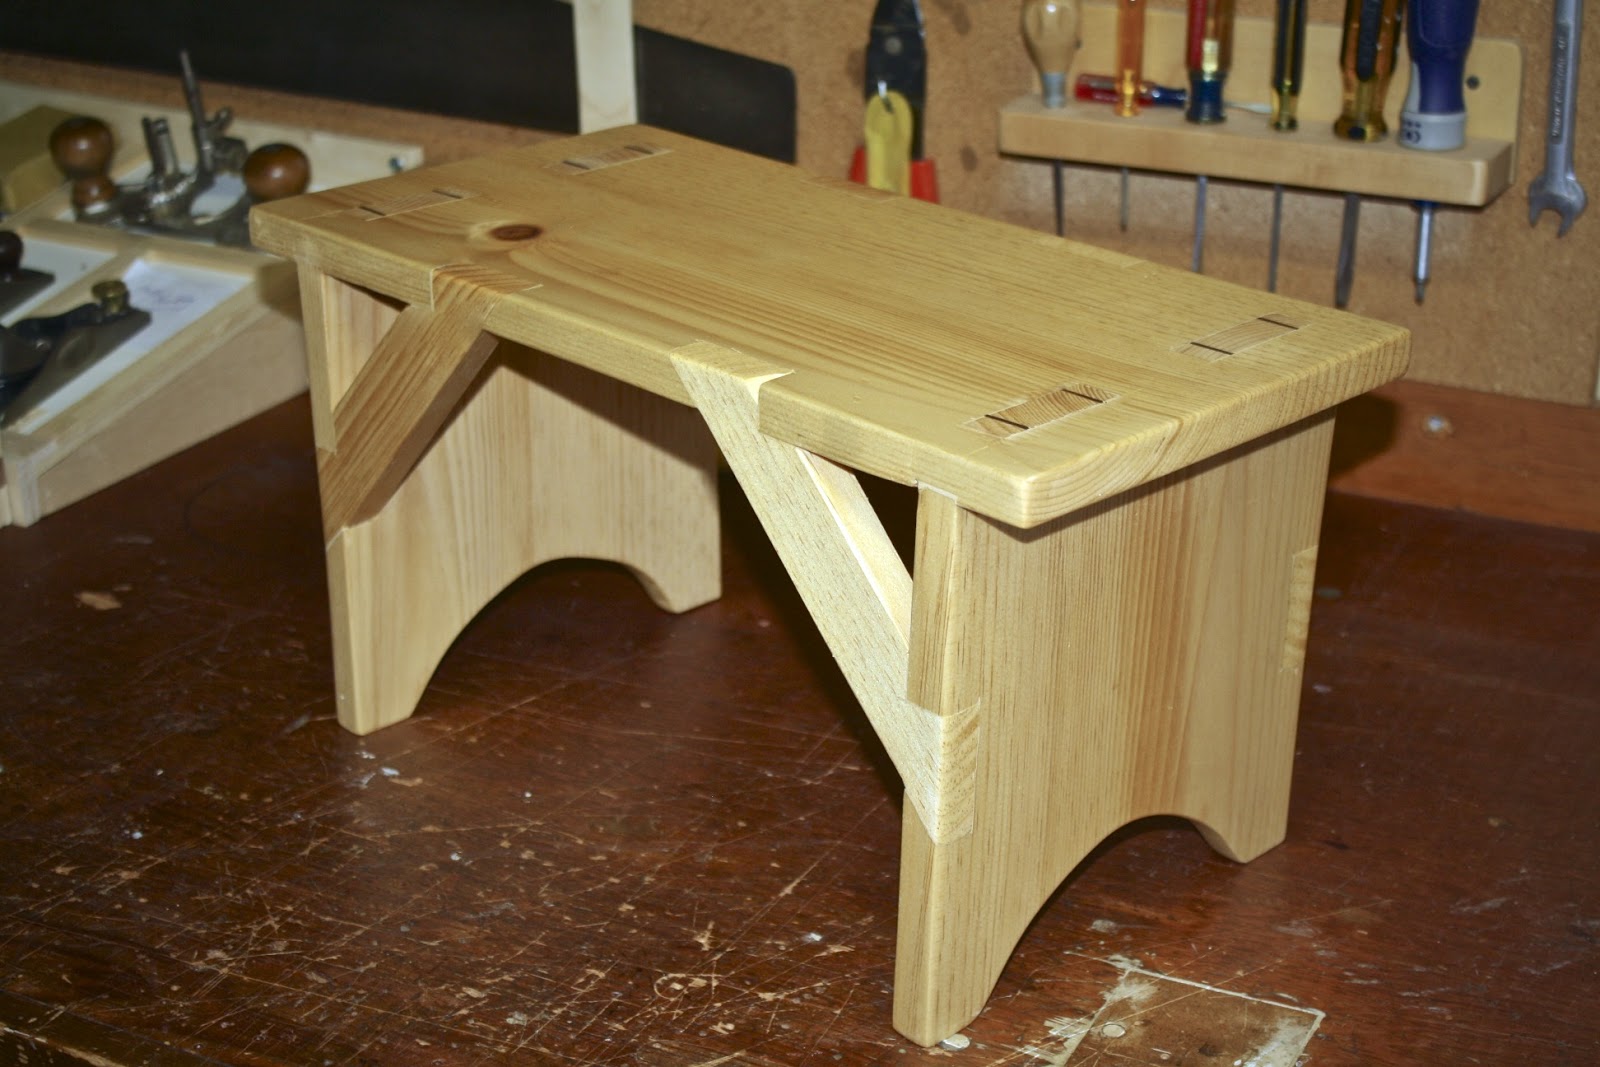 Alexander Woodworks: Shaker Bench Built with Hand Tools